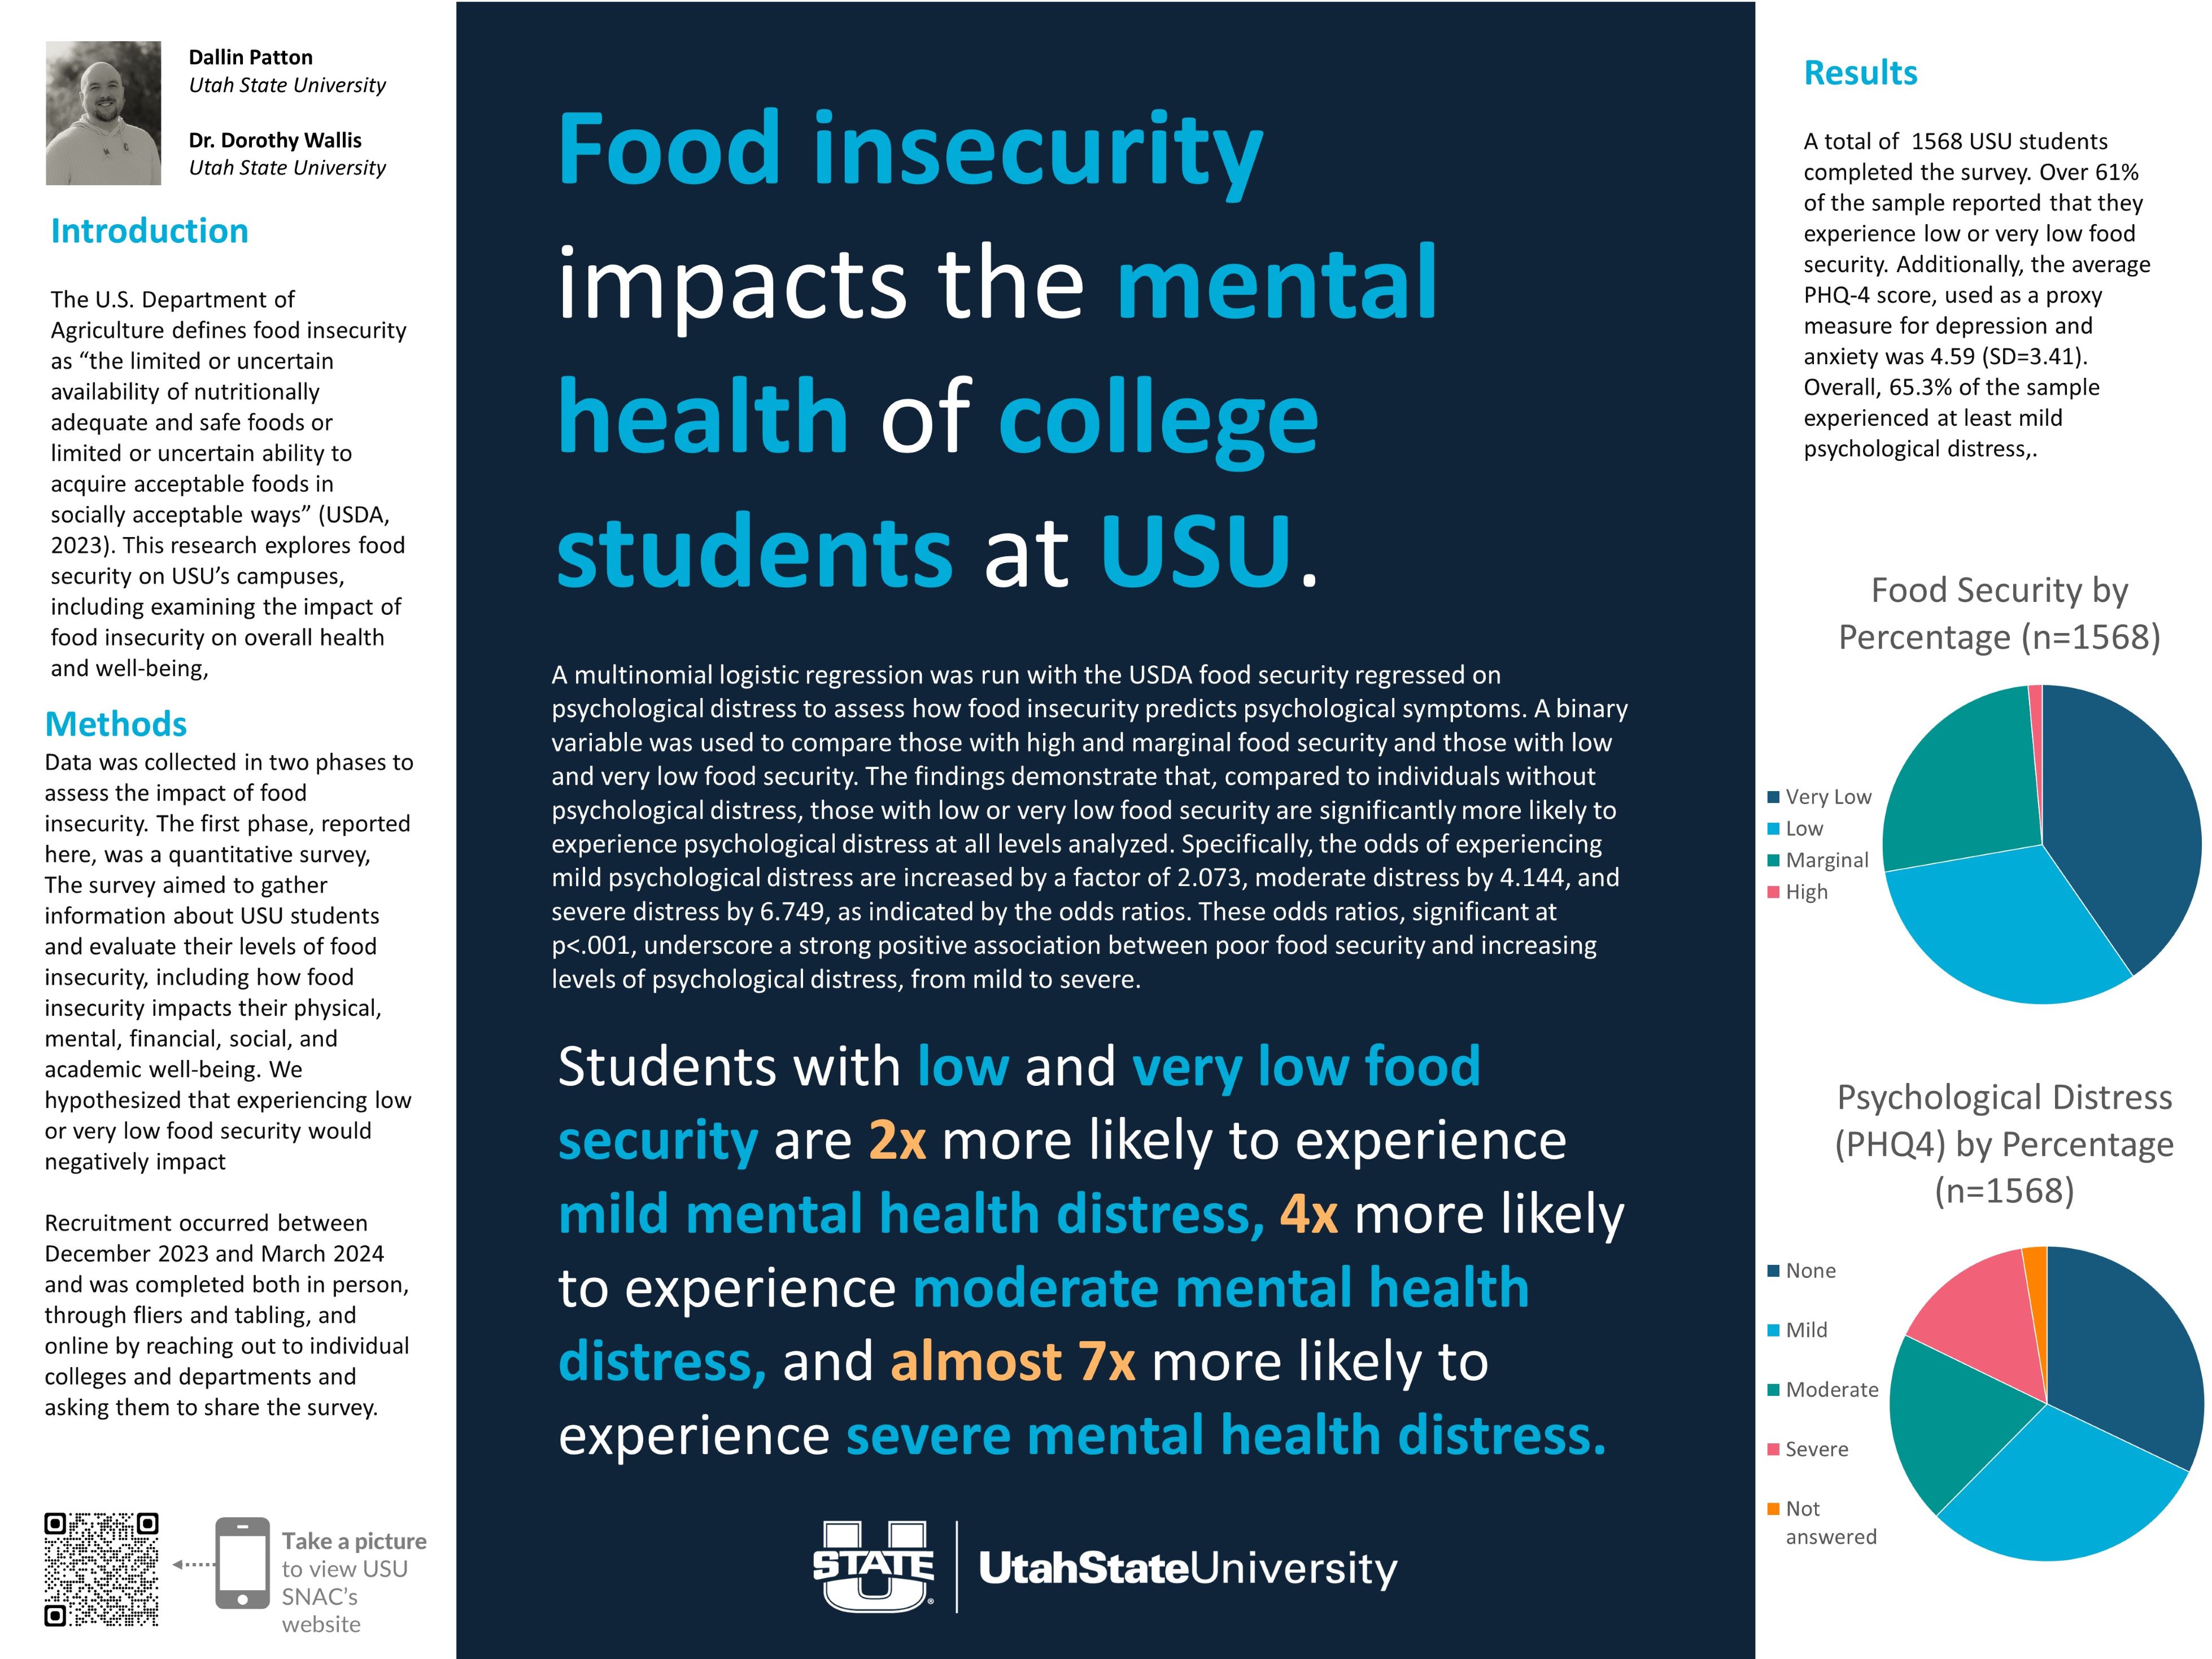 Students with low and very low food security are 2x more likely to experience mild mental health distress, 4x more likely to experience moderate mental health distress, and almost 7x more likely to experience severe mental health distress. 
